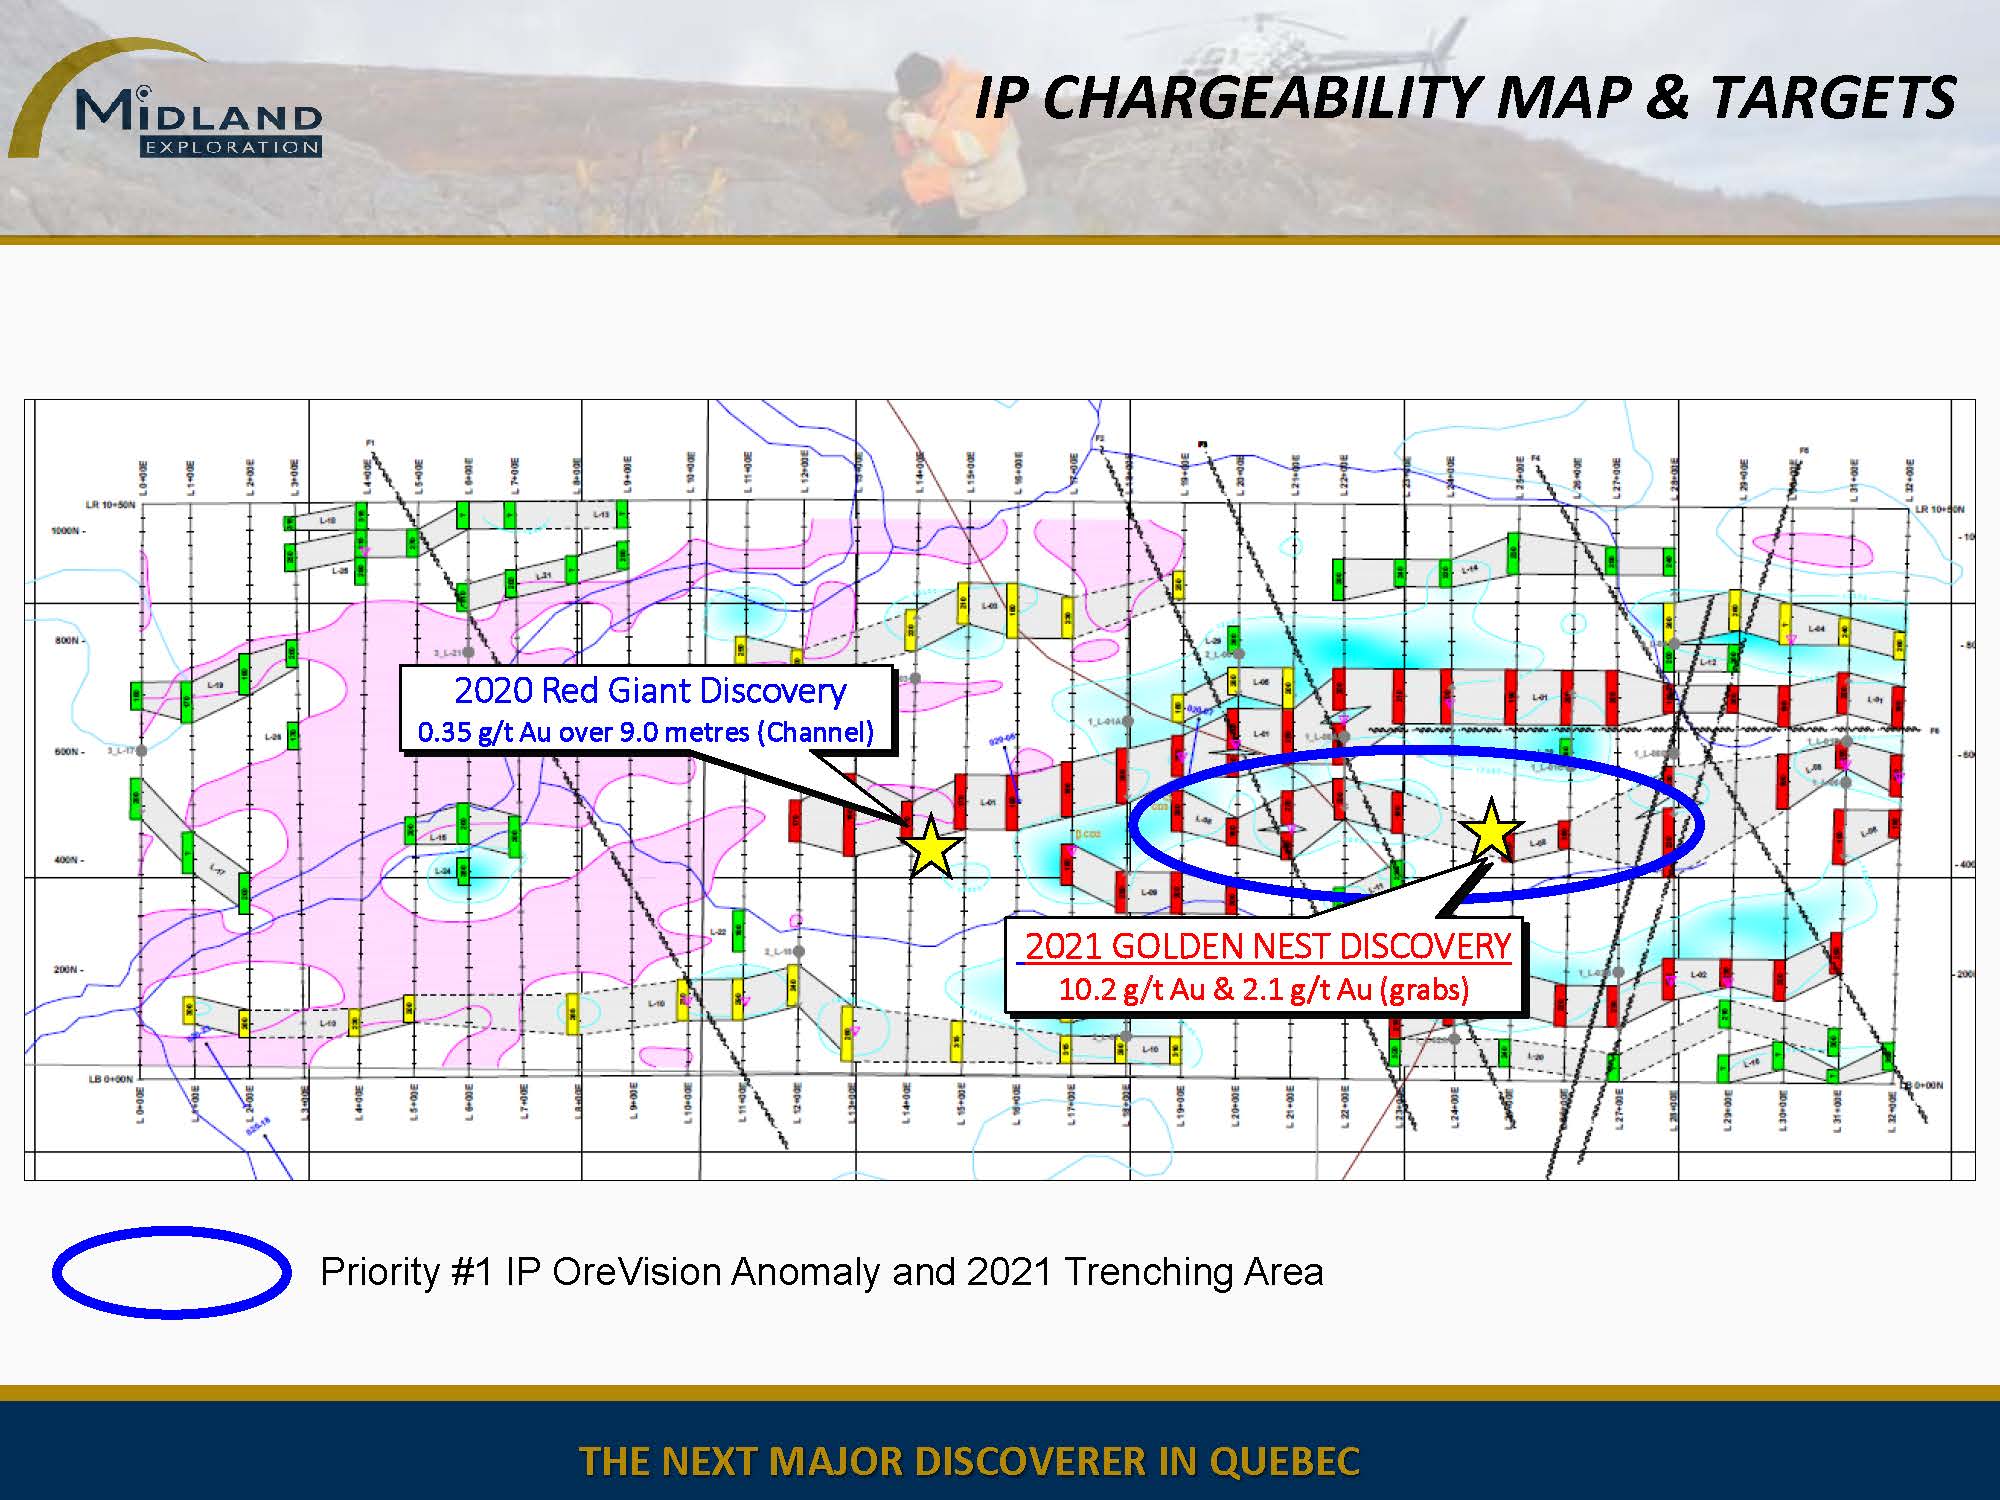 Figure 6 IP Chargeability Map&Targets